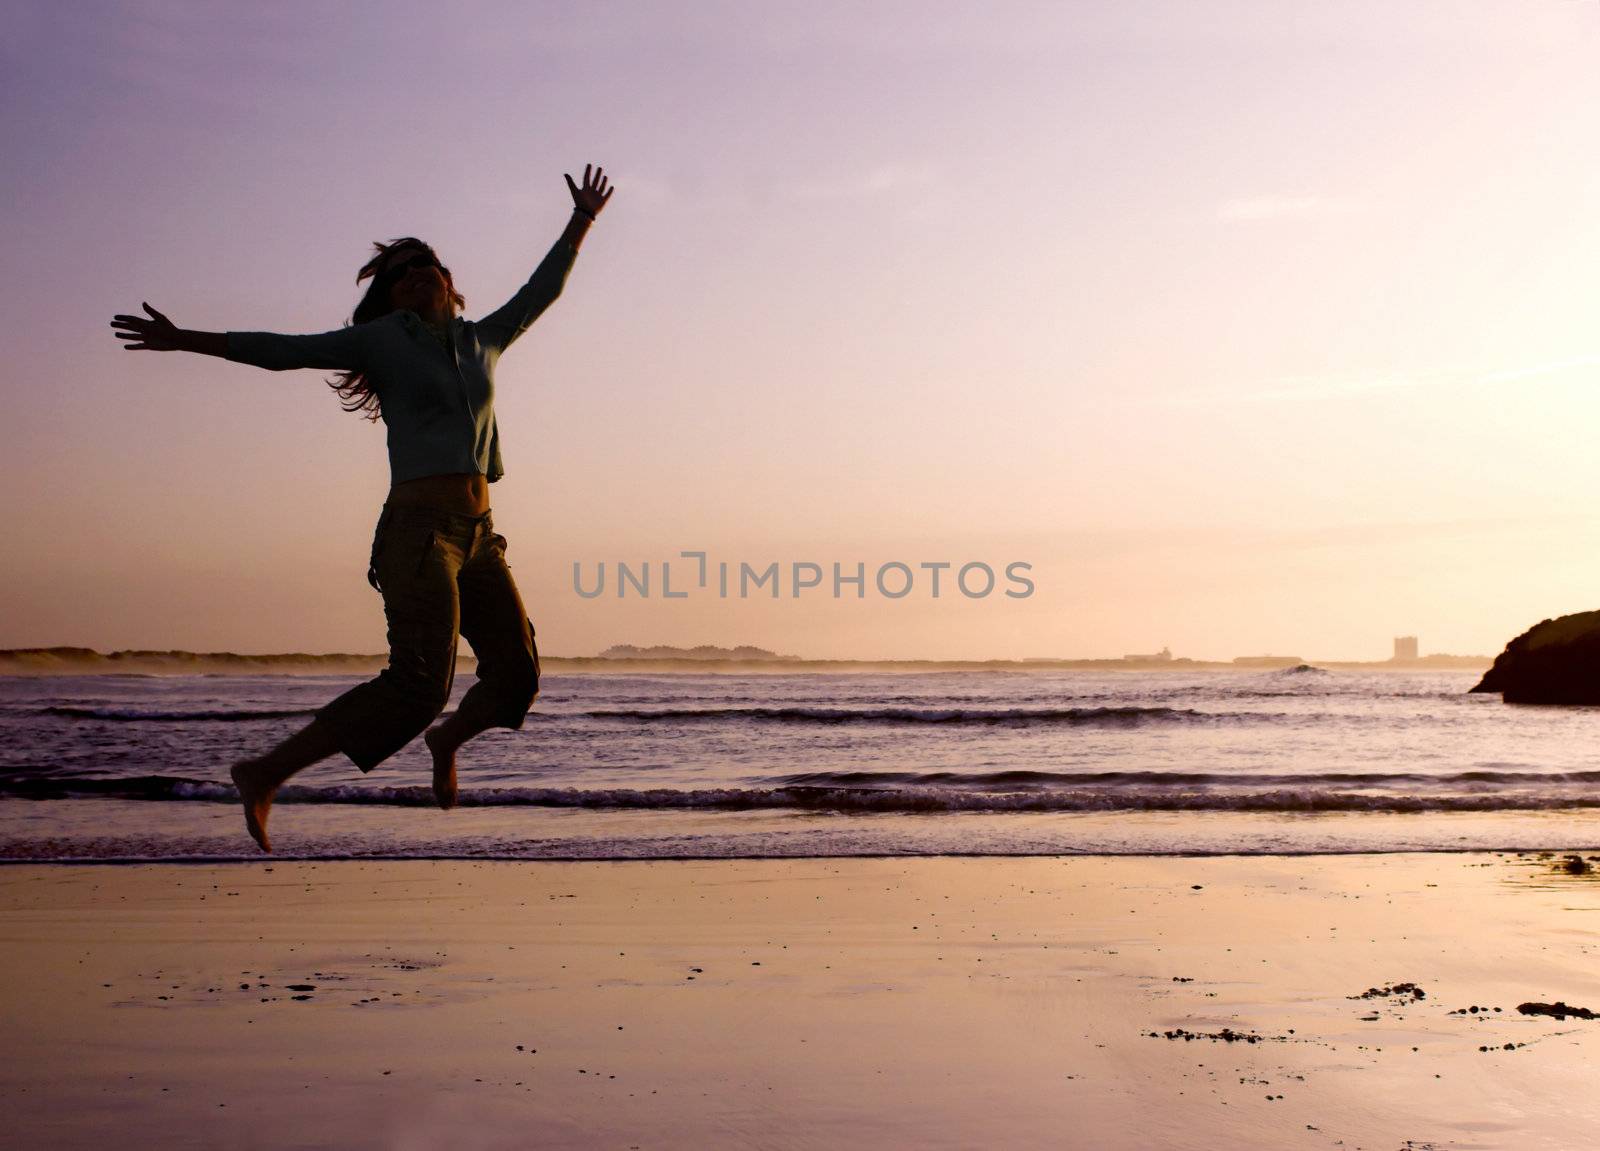 Woman doing exercise on the beach